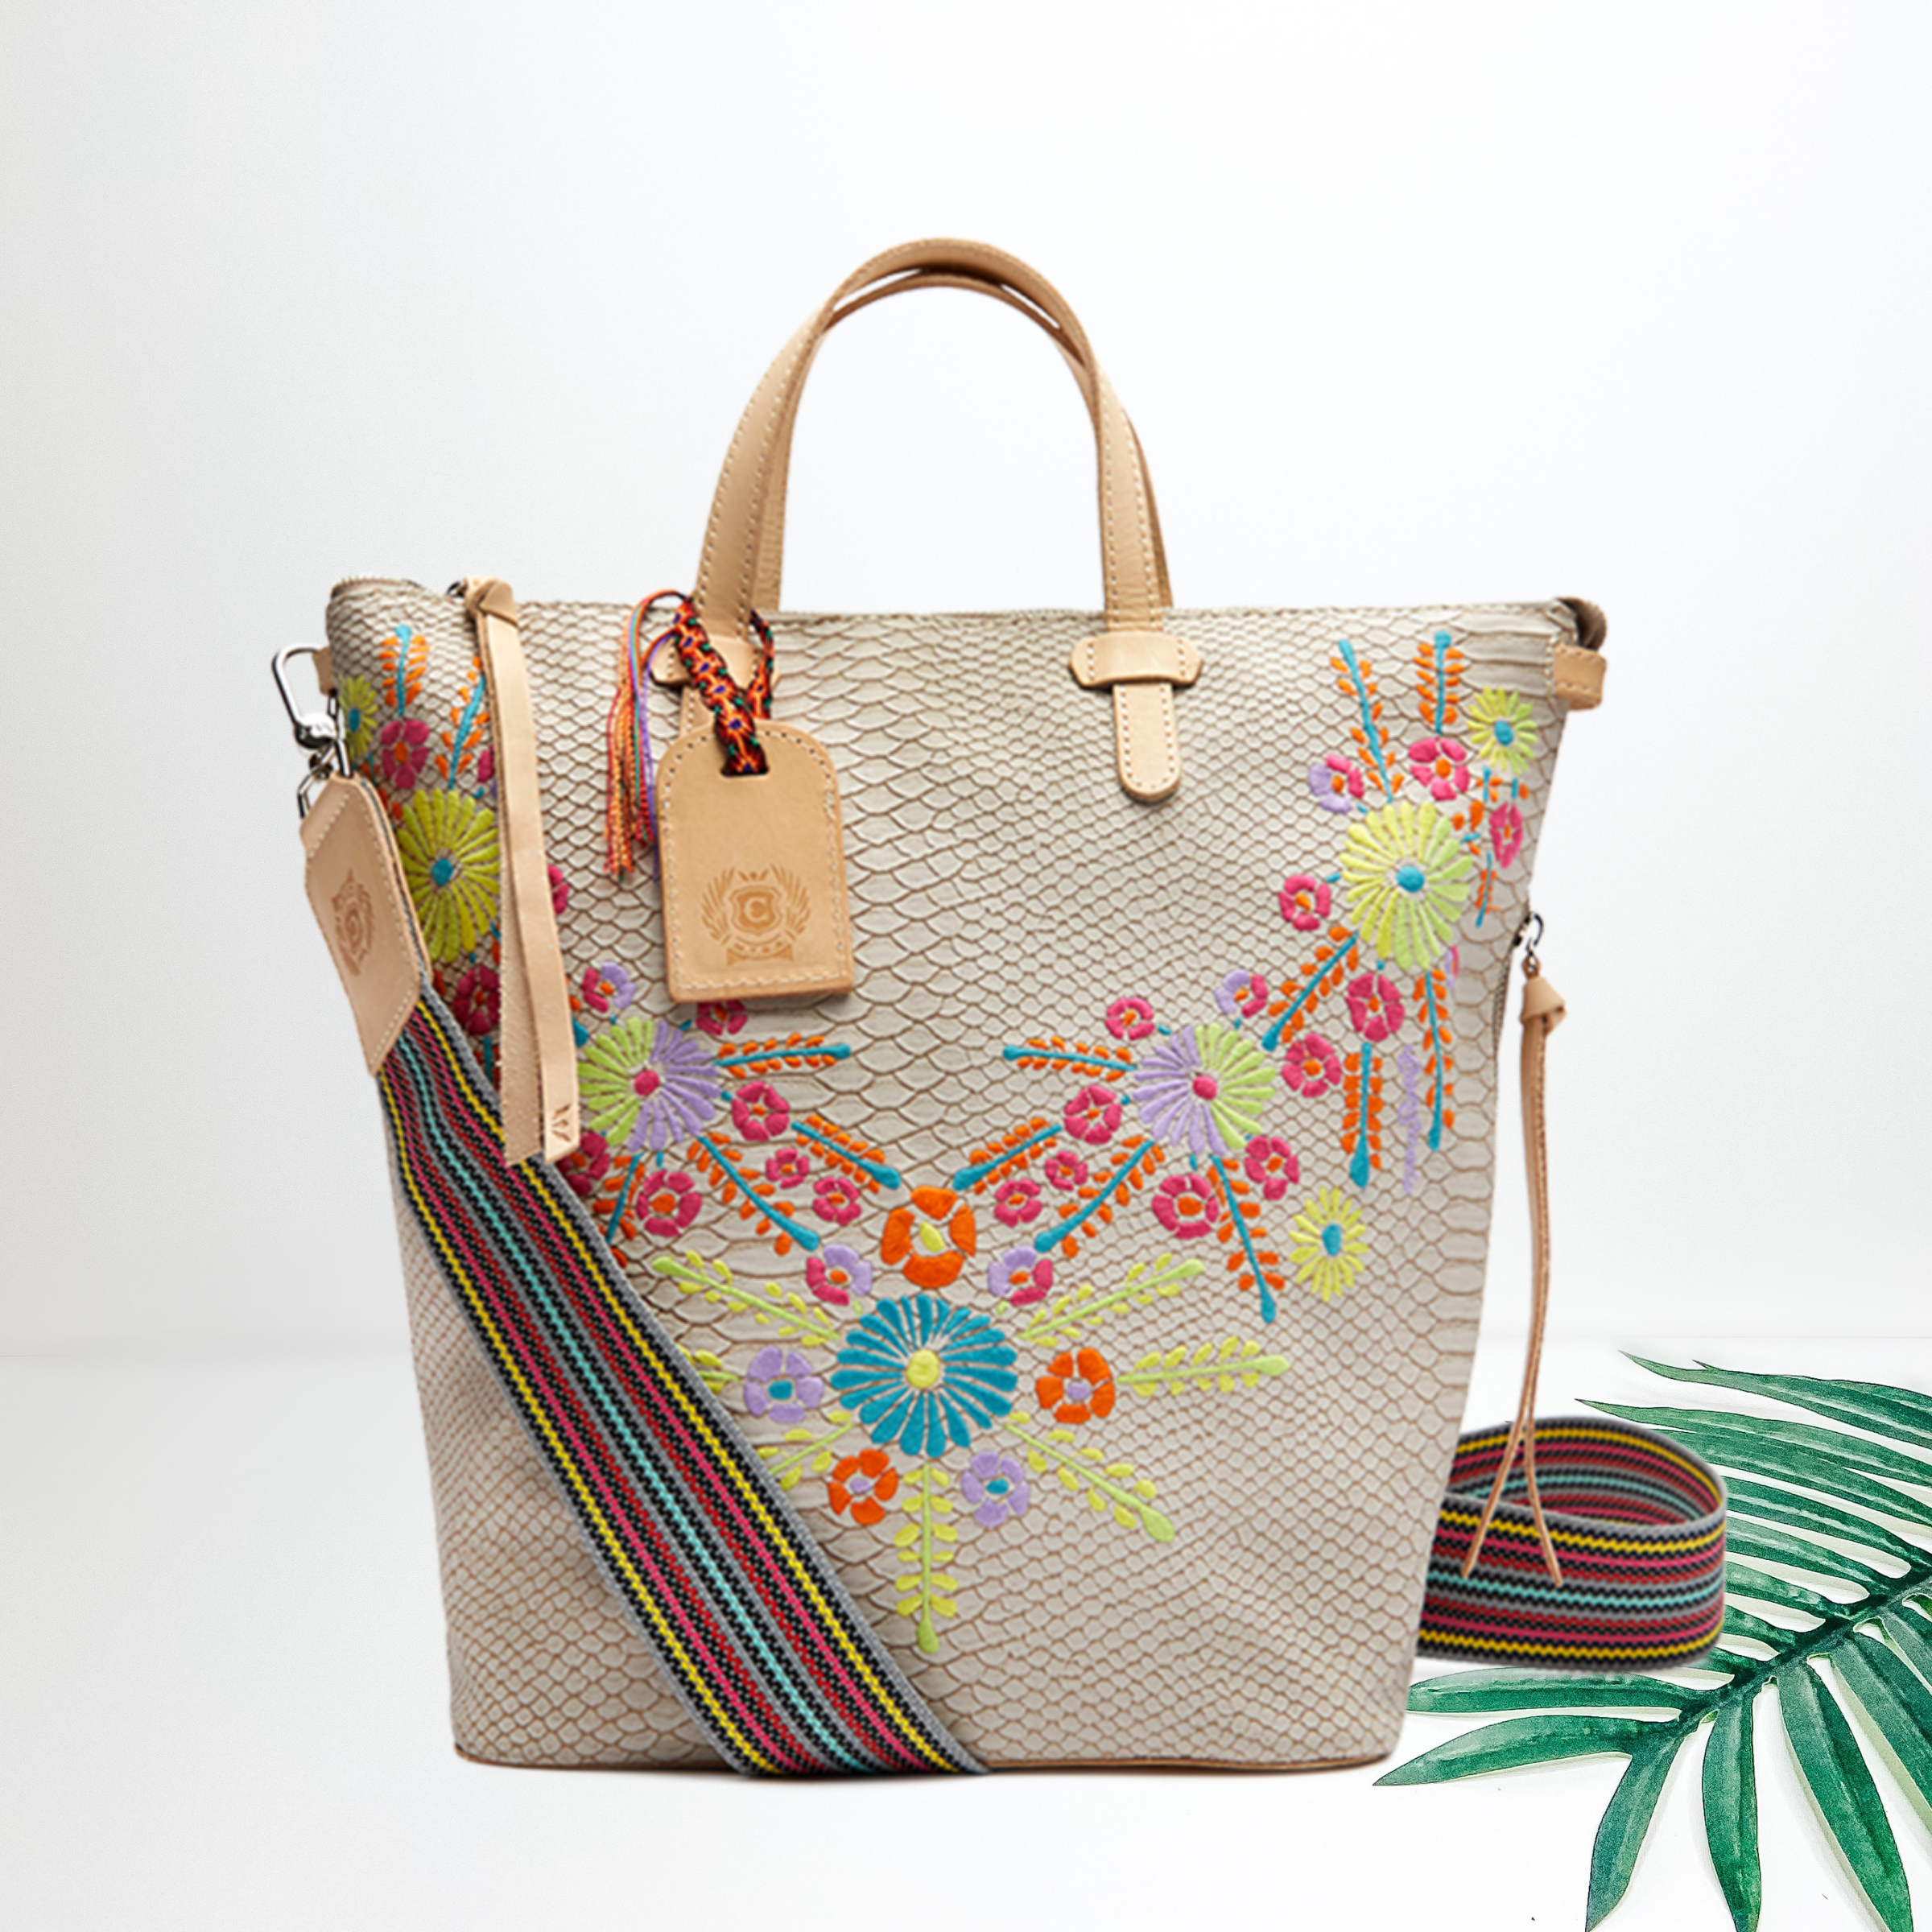 A beige snake print sling bag with colorful floral embroidery. Pictured on white background with a palm leaf.